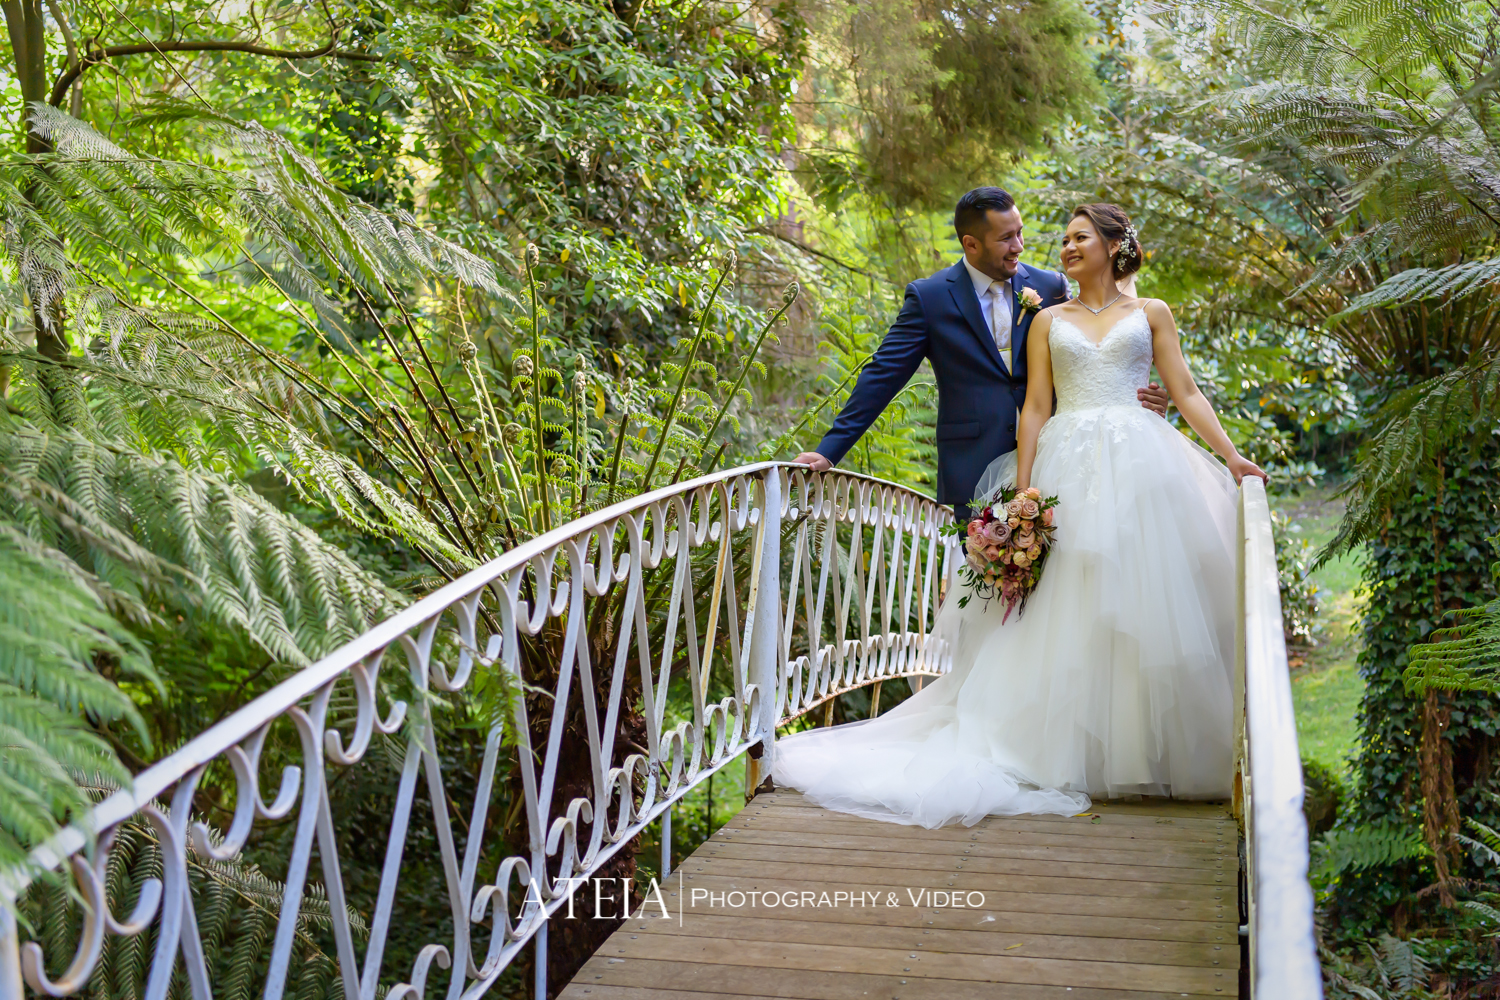 , Wedding Photographer Melbourne at Tatra Receptions by ATEIA Photography